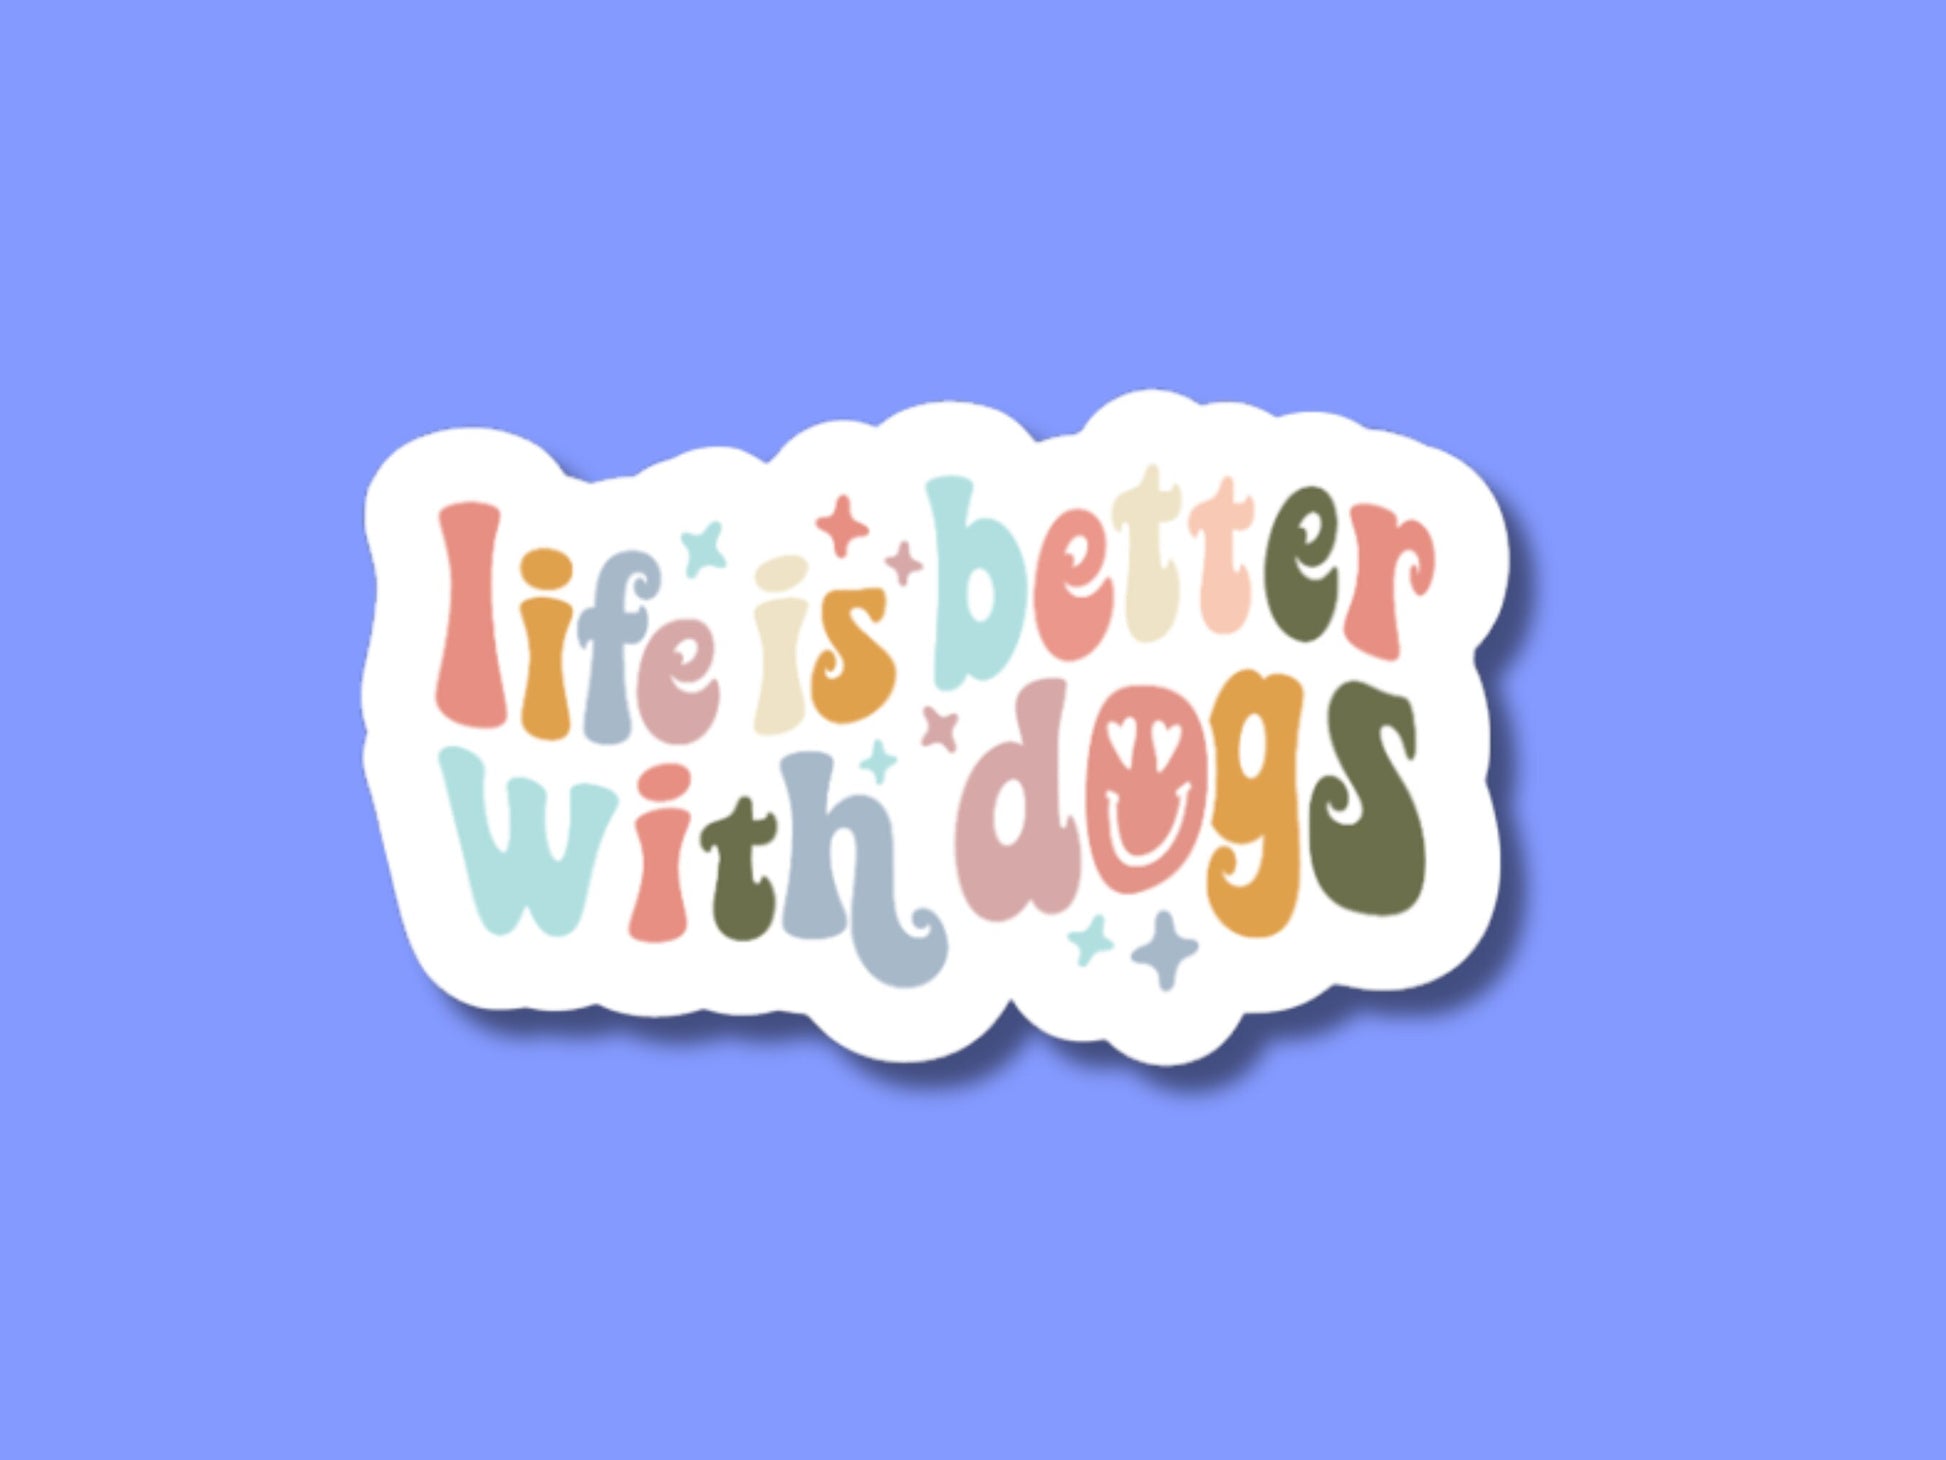 life is better with dogs, dog stickers, dog lover gifts, pet shop stickers, dog mom, dogs over people, goldendoodle mom, pittie stickers